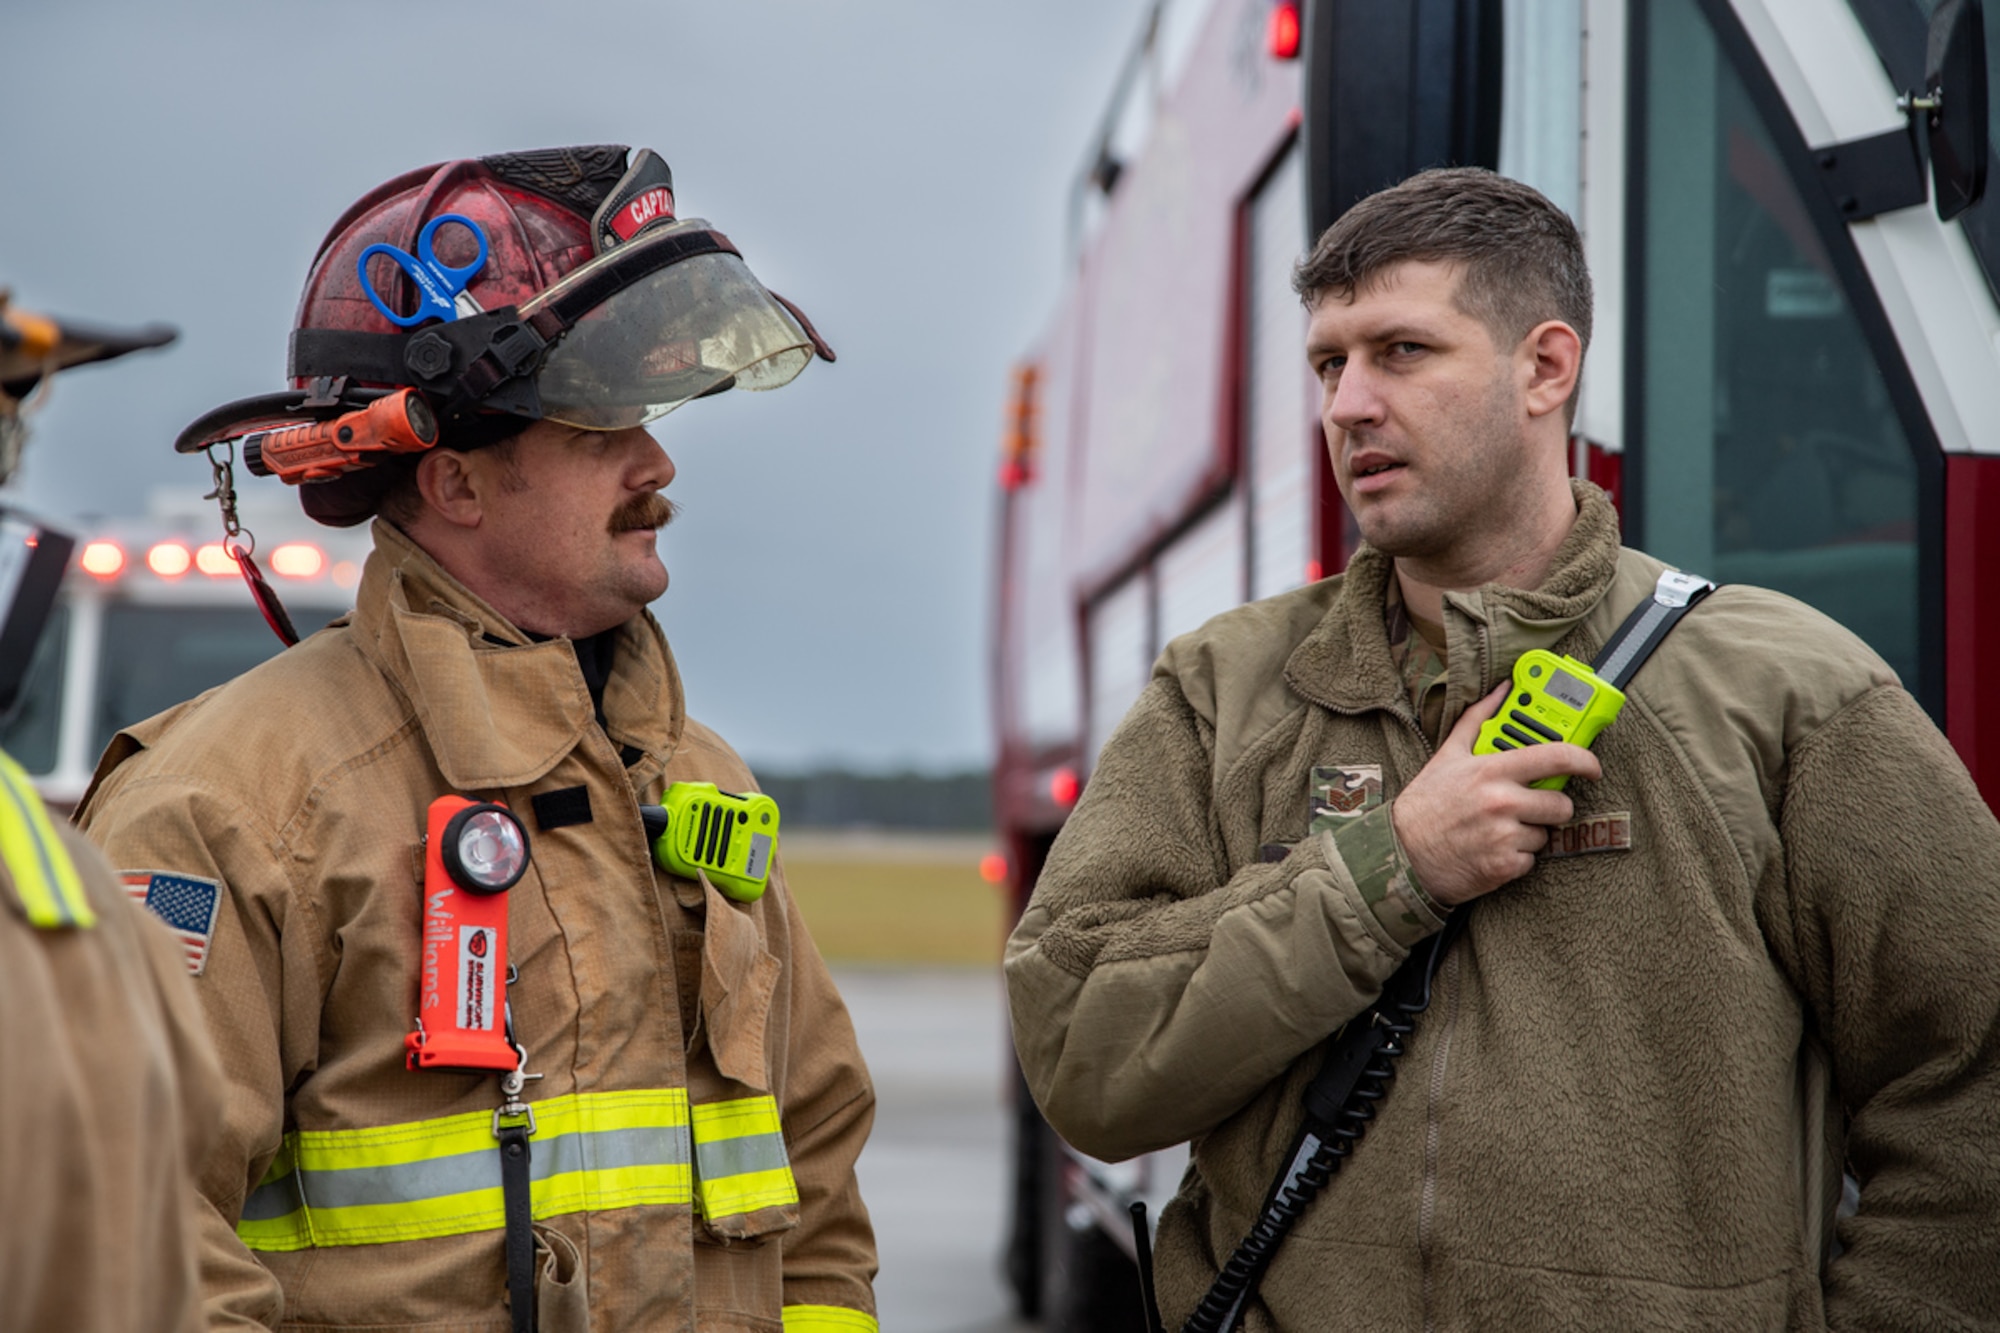 Members of the 23rd Civil Engineer Squadron Fire Department discuss the outcome of a simulated dropped munition emergency call during exercise Mosaic Tiger 24-1 at Moody Air Force Base, Georgia, Nov. 14, 2023. After the Airmen complete all the required tasks for the scenario inject, evaluators provide recommended areas of improvement or comment on best practices. (U.S. Air Force photo by Andrea Jenkins)